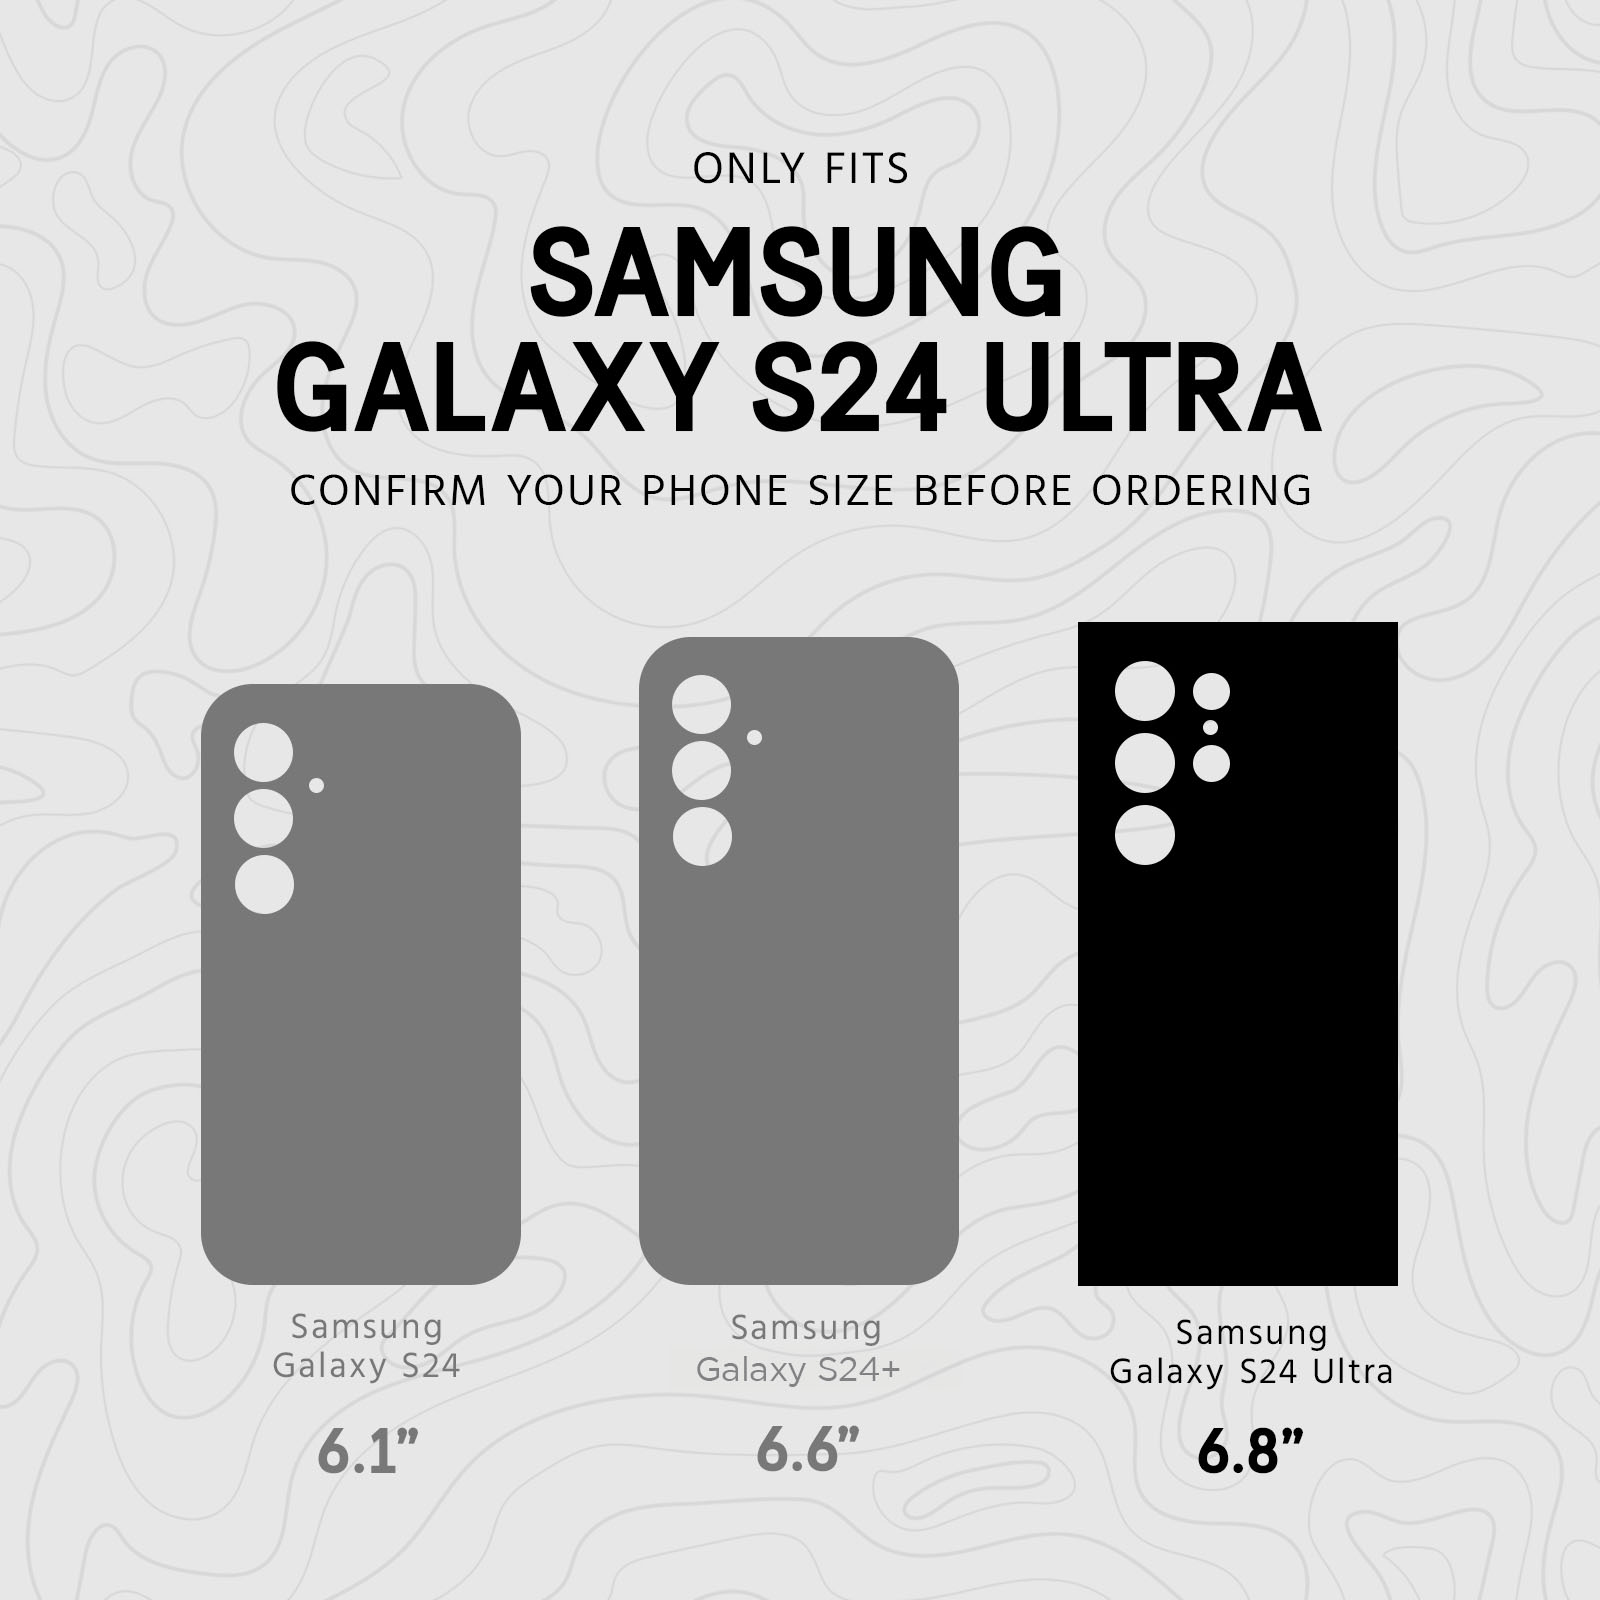 ONLY FITS SAMSUNG GALAXY S24 ULTRA. CONFIRM YOUR PHONE SIZE BEFORE ORDERING